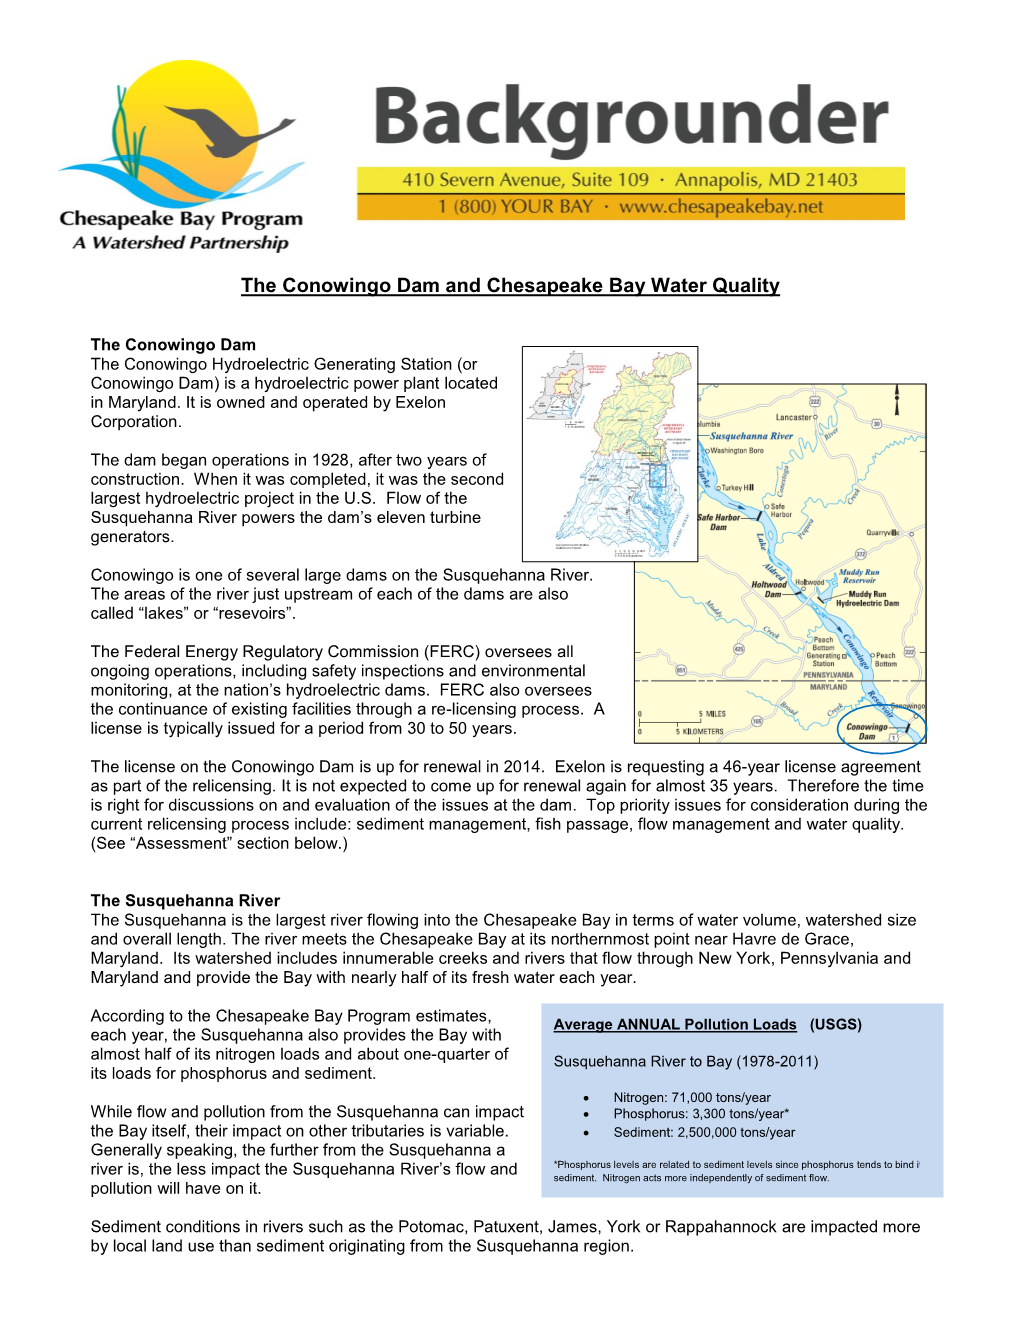 The Conowingo Dam and Chesapeake Bay Water Quality